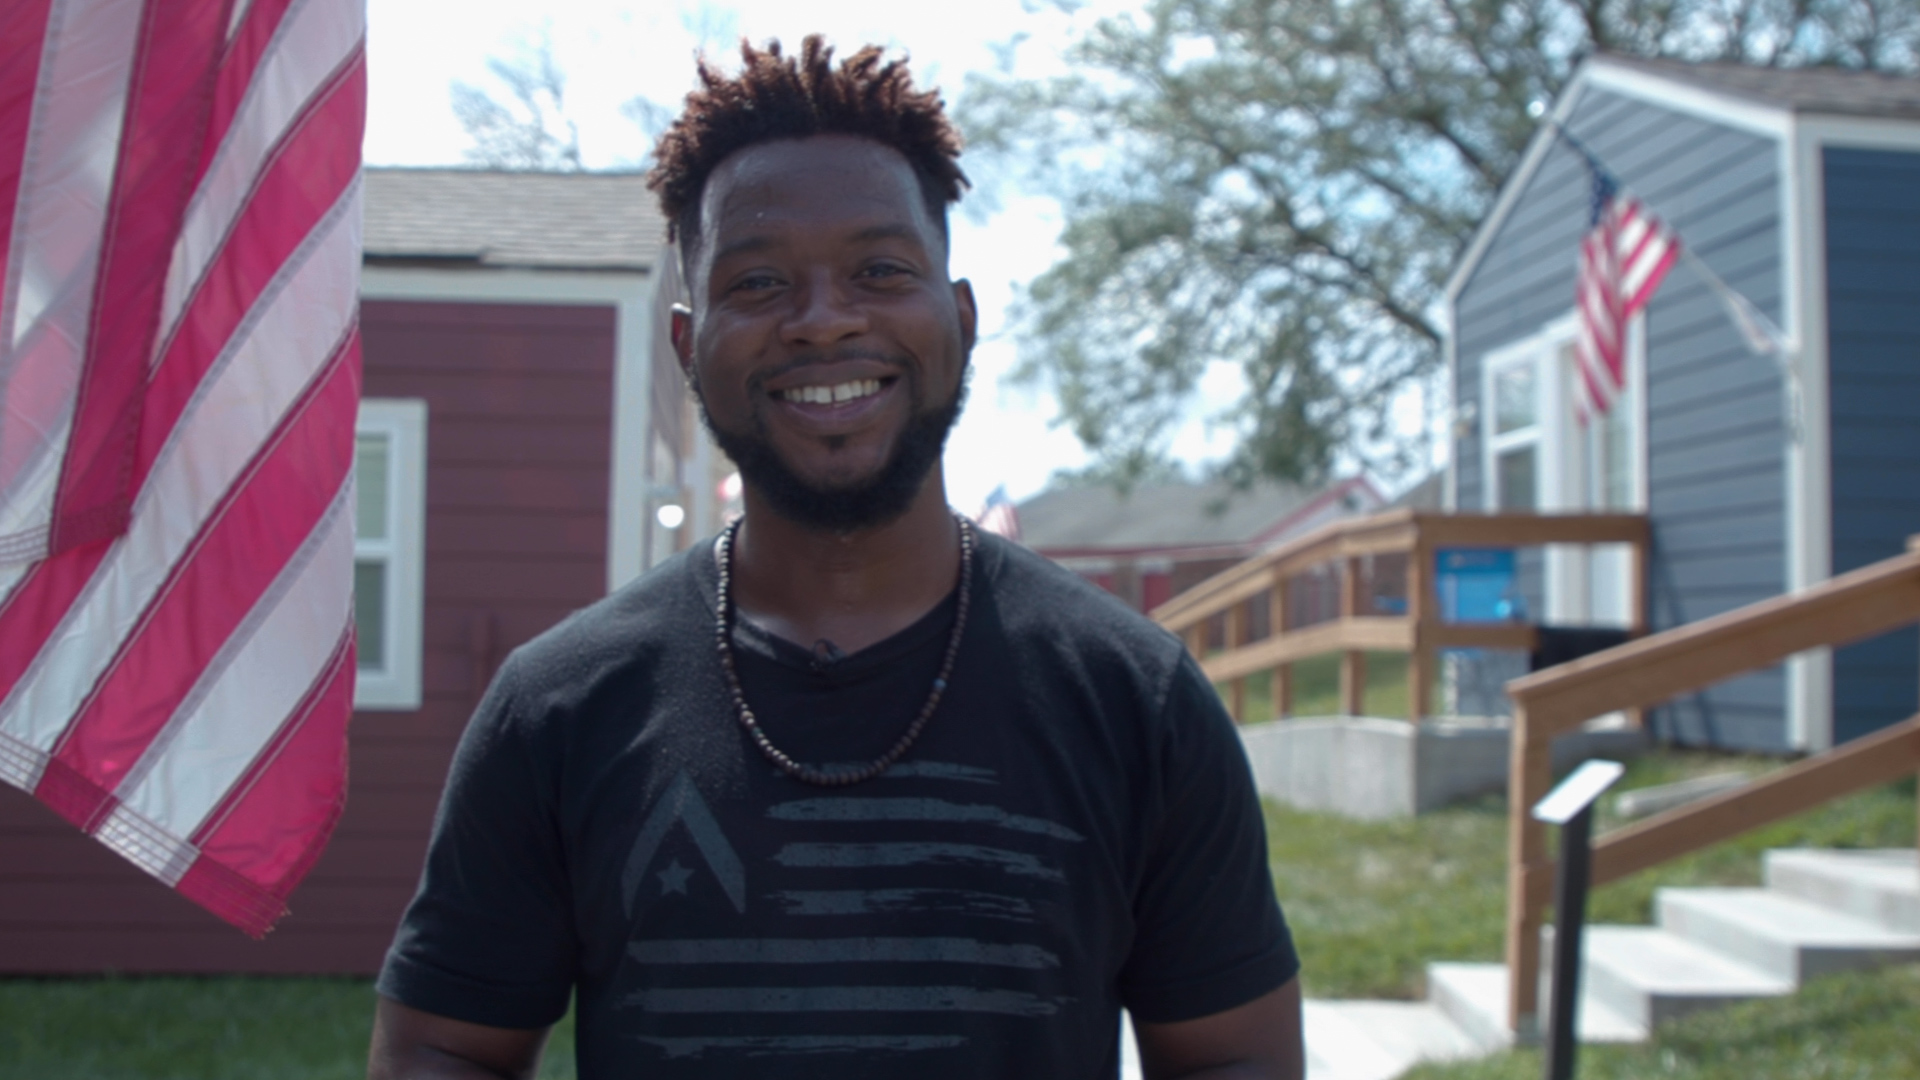 Tiny Homes Offer Path Out of Homelessness [Video]